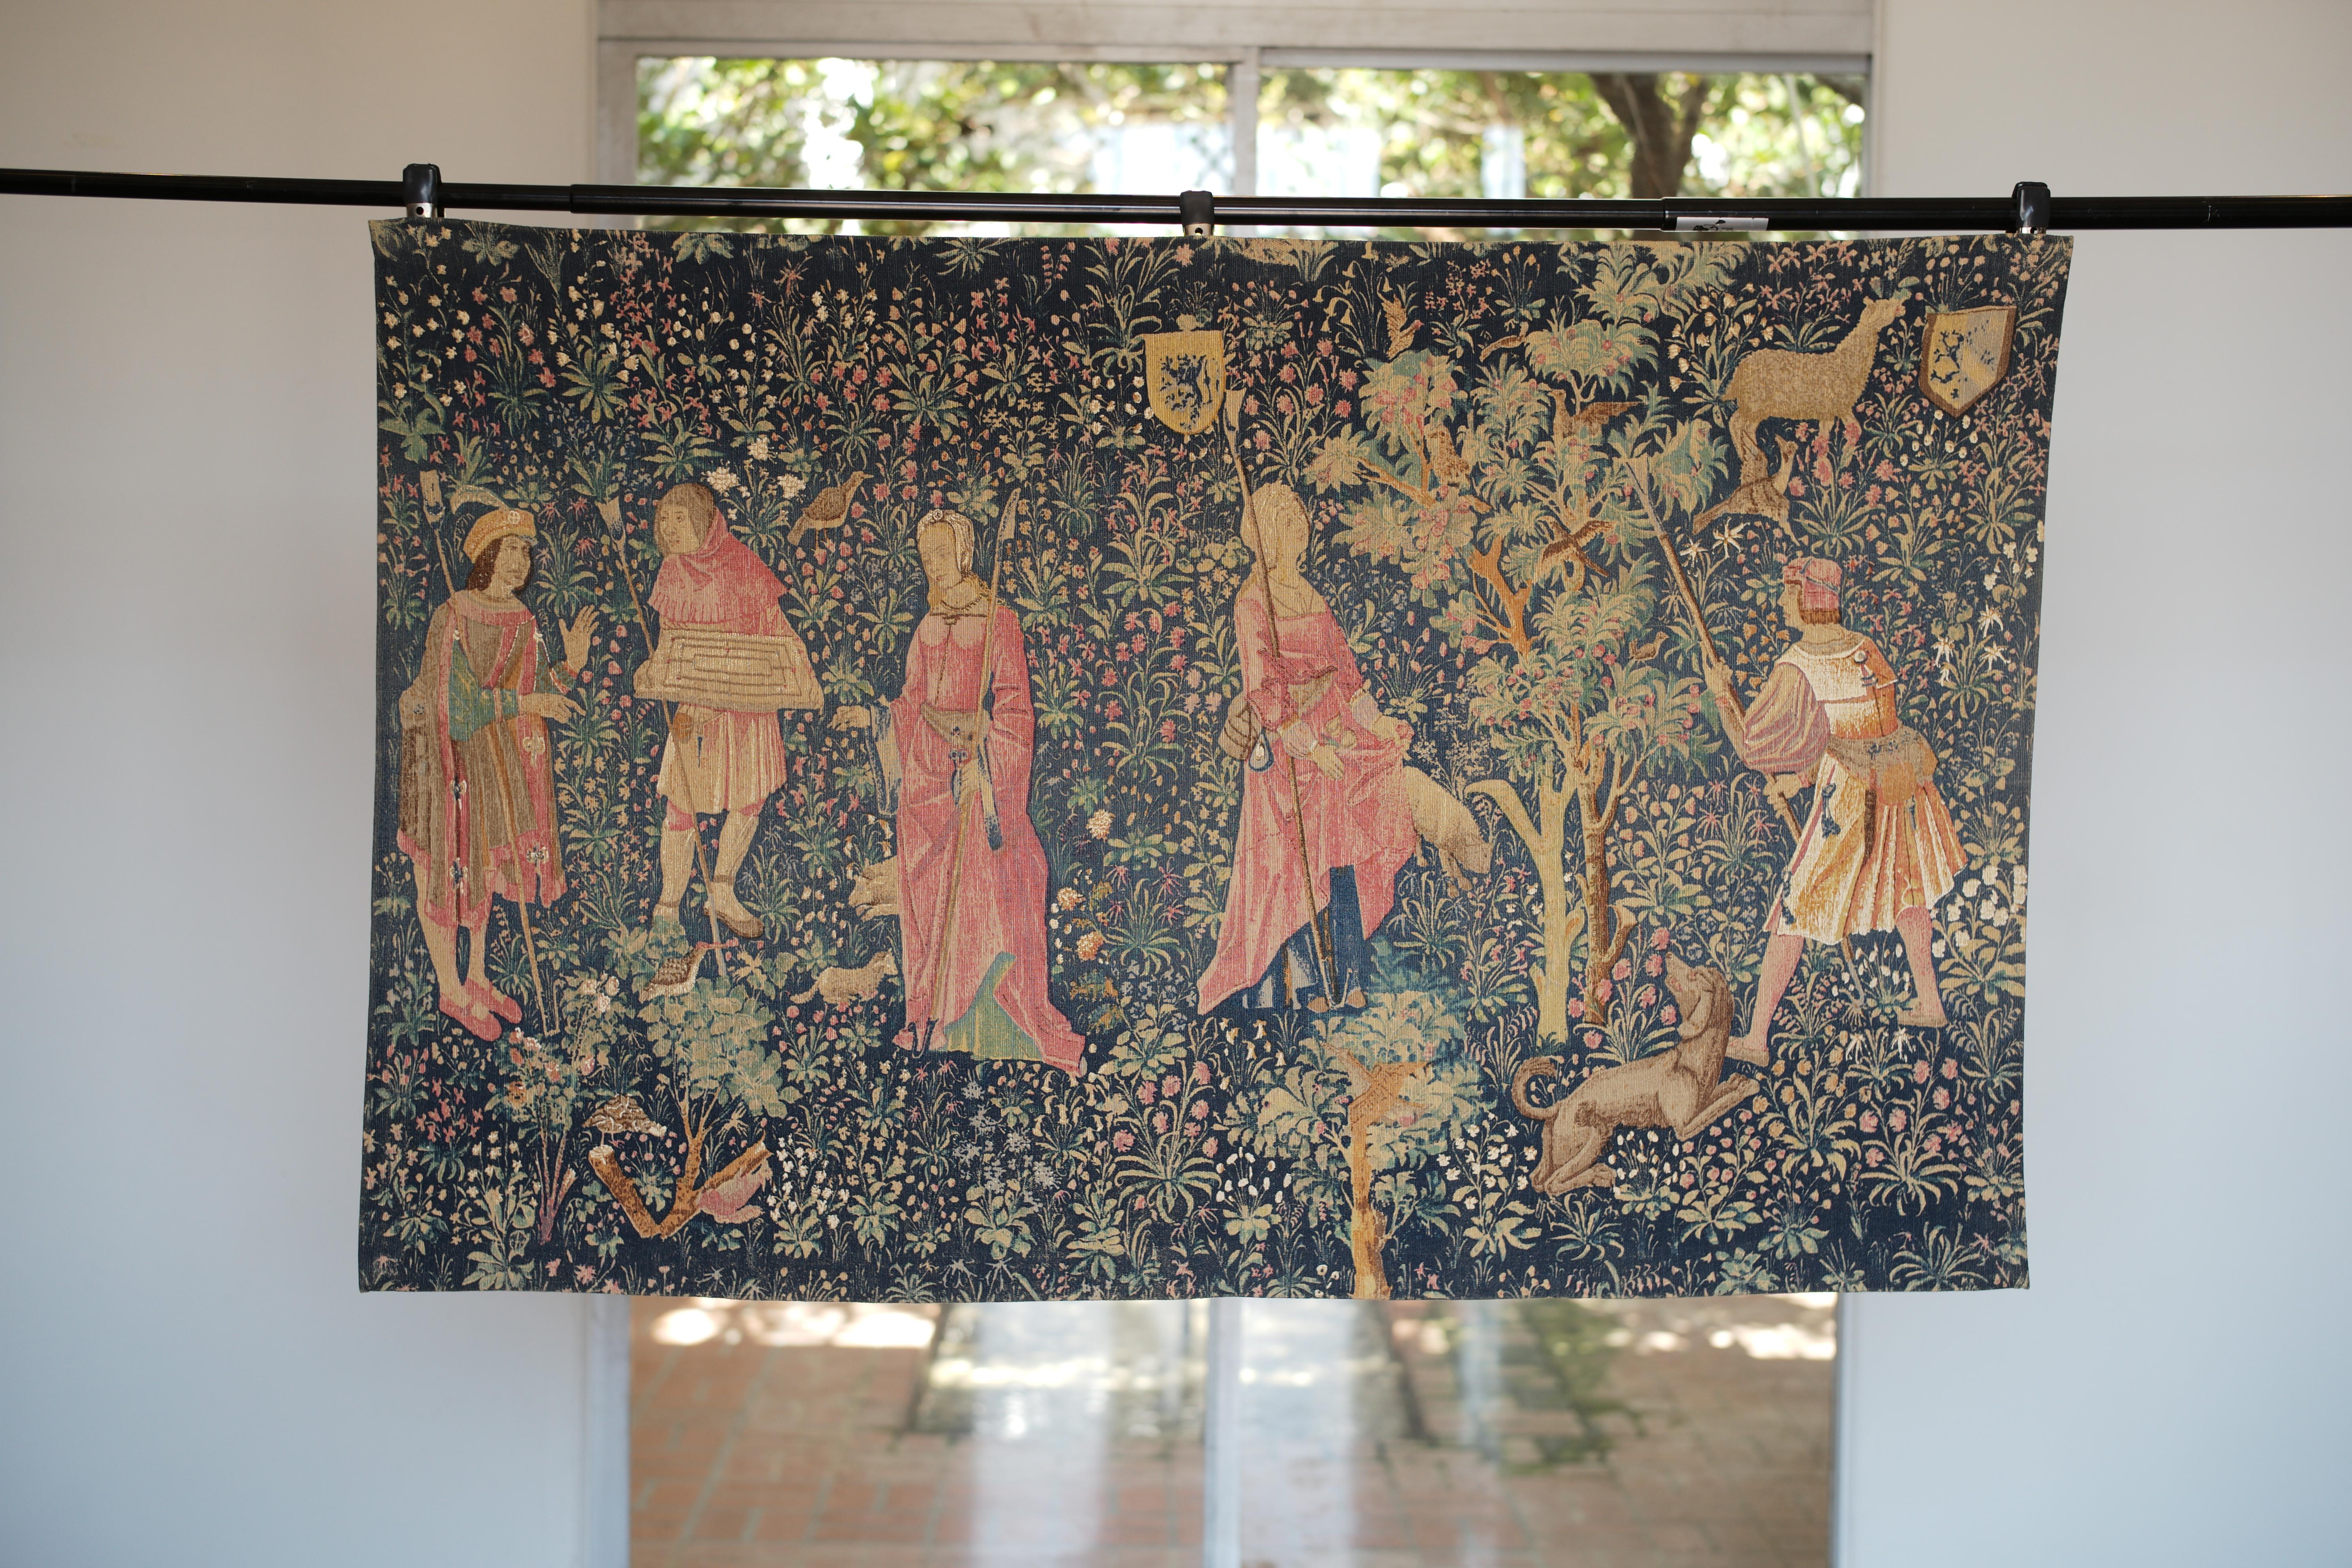 This magnificent French Vintage Aubusson Style Tapestry, edited by Art de Rambouillet Atelier and inspired by Thomas Bohier, chamberlain of France, who built the Chenonceau castle, depicting figures wearing Italian style clothing who were brought to